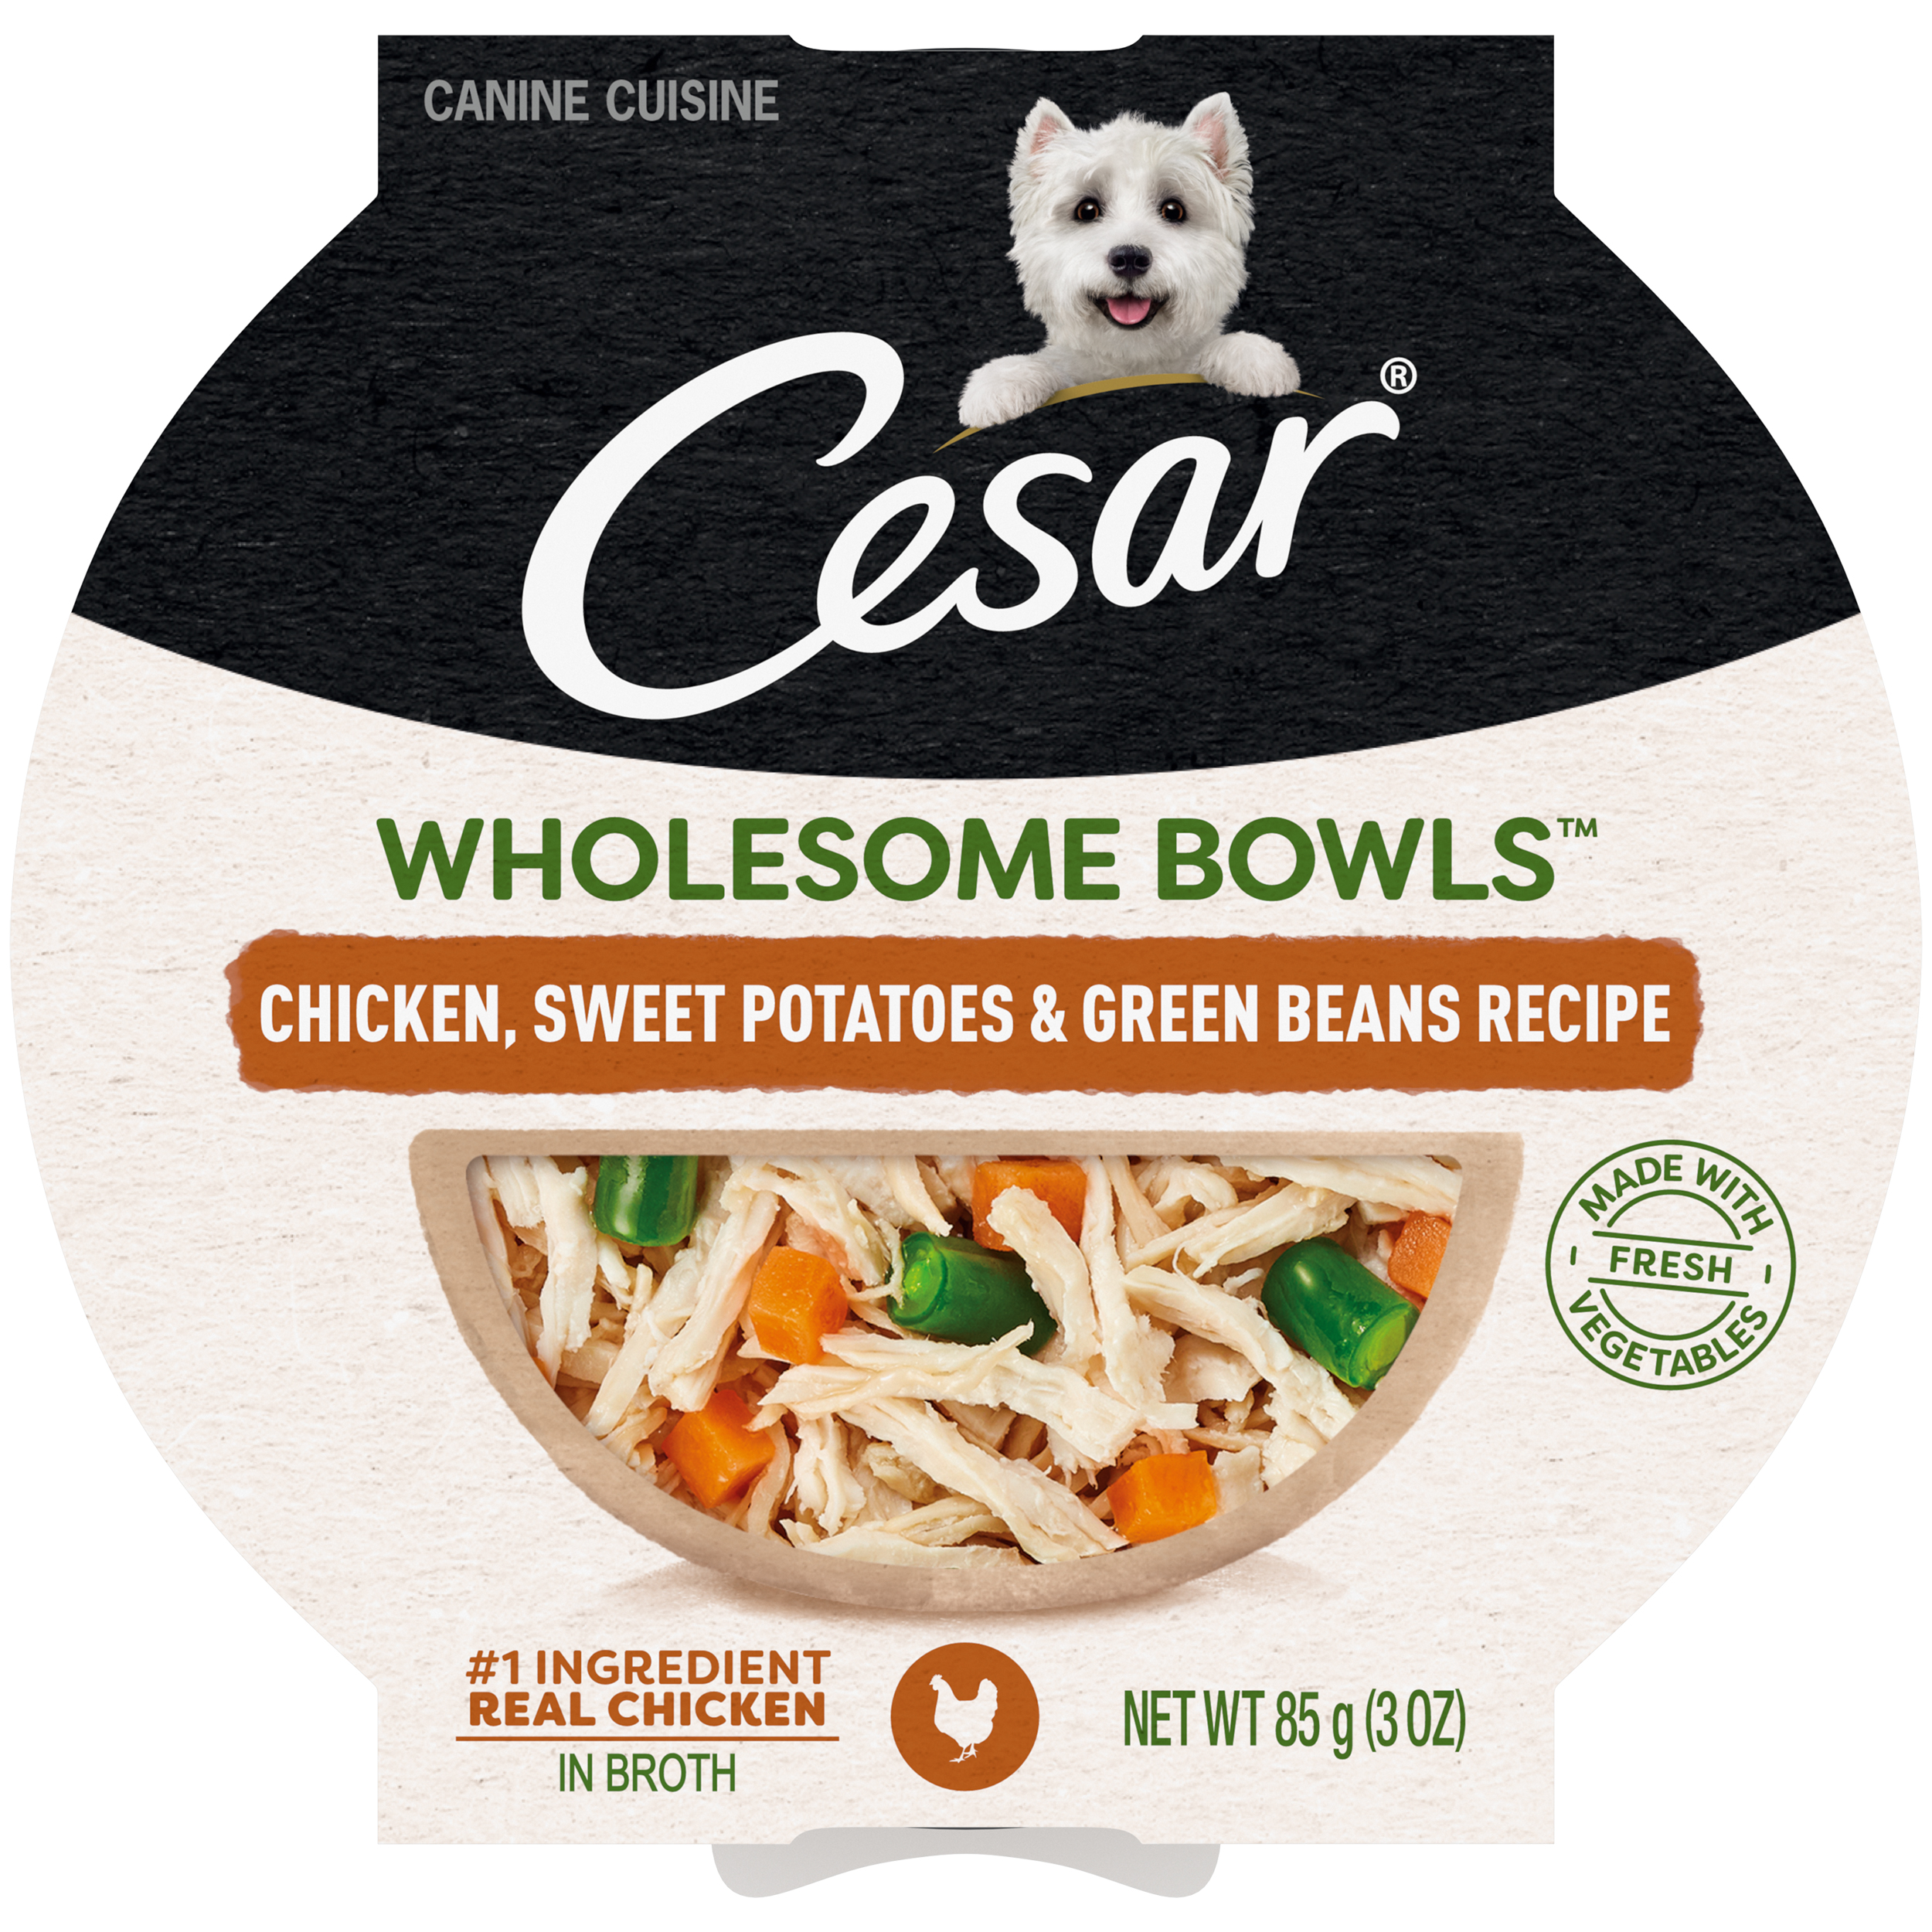 10/3 oz. Cesar Wholesome Bowls Chicken, Sweet Potato & Green Beans - Health/First Aid